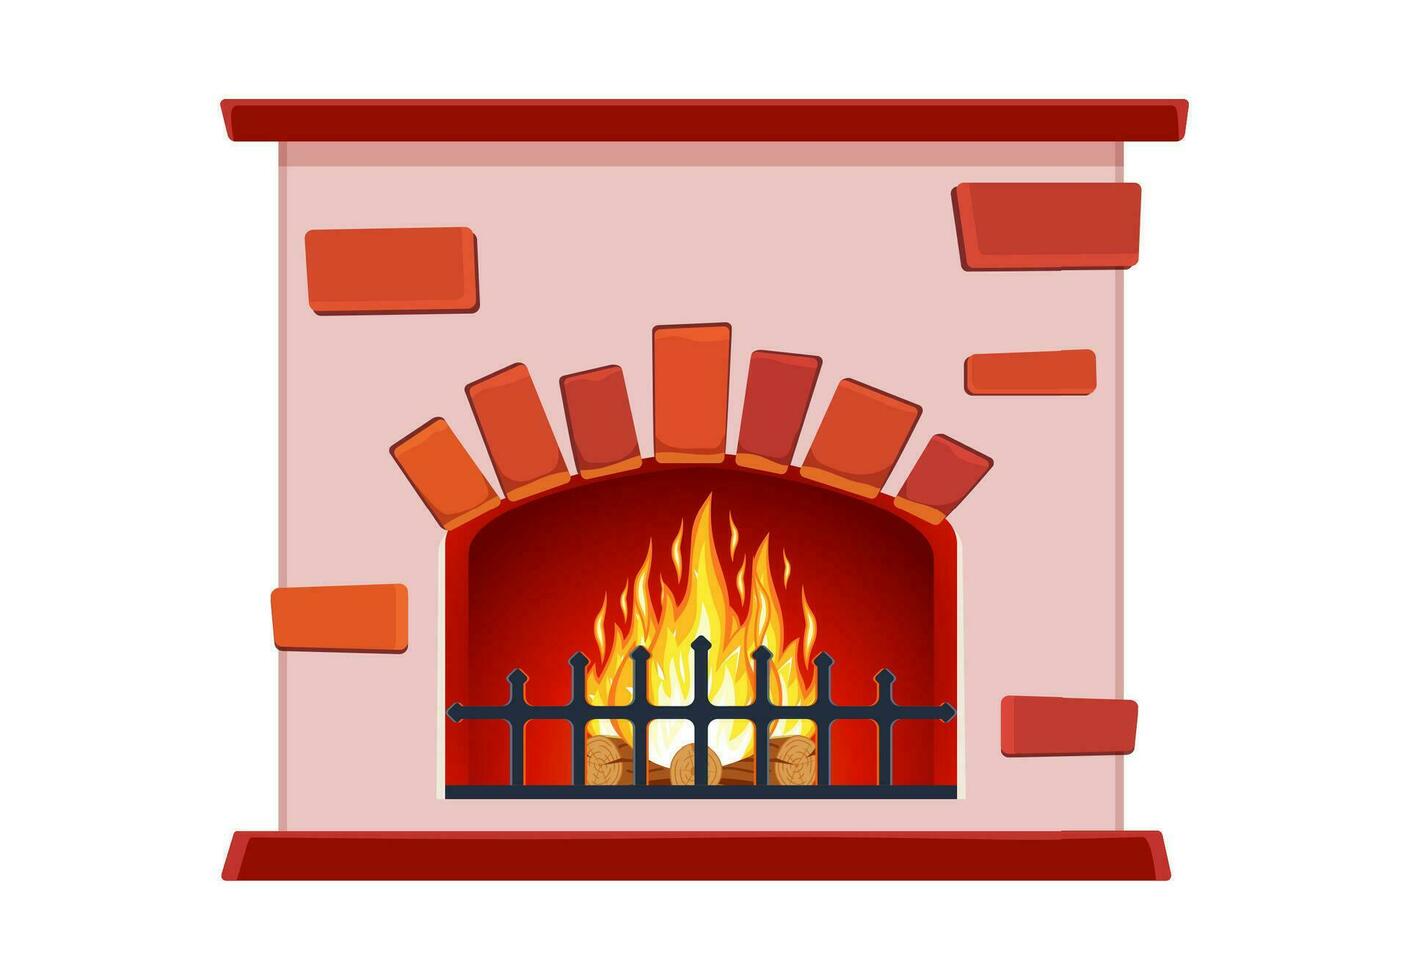 cartoon Winter interior bonfire. Classic fireplace made of red bricks, bright burning flame and smoldering logs inside. Home fireplace for comfort and relaxation. Vector illustration in flat style